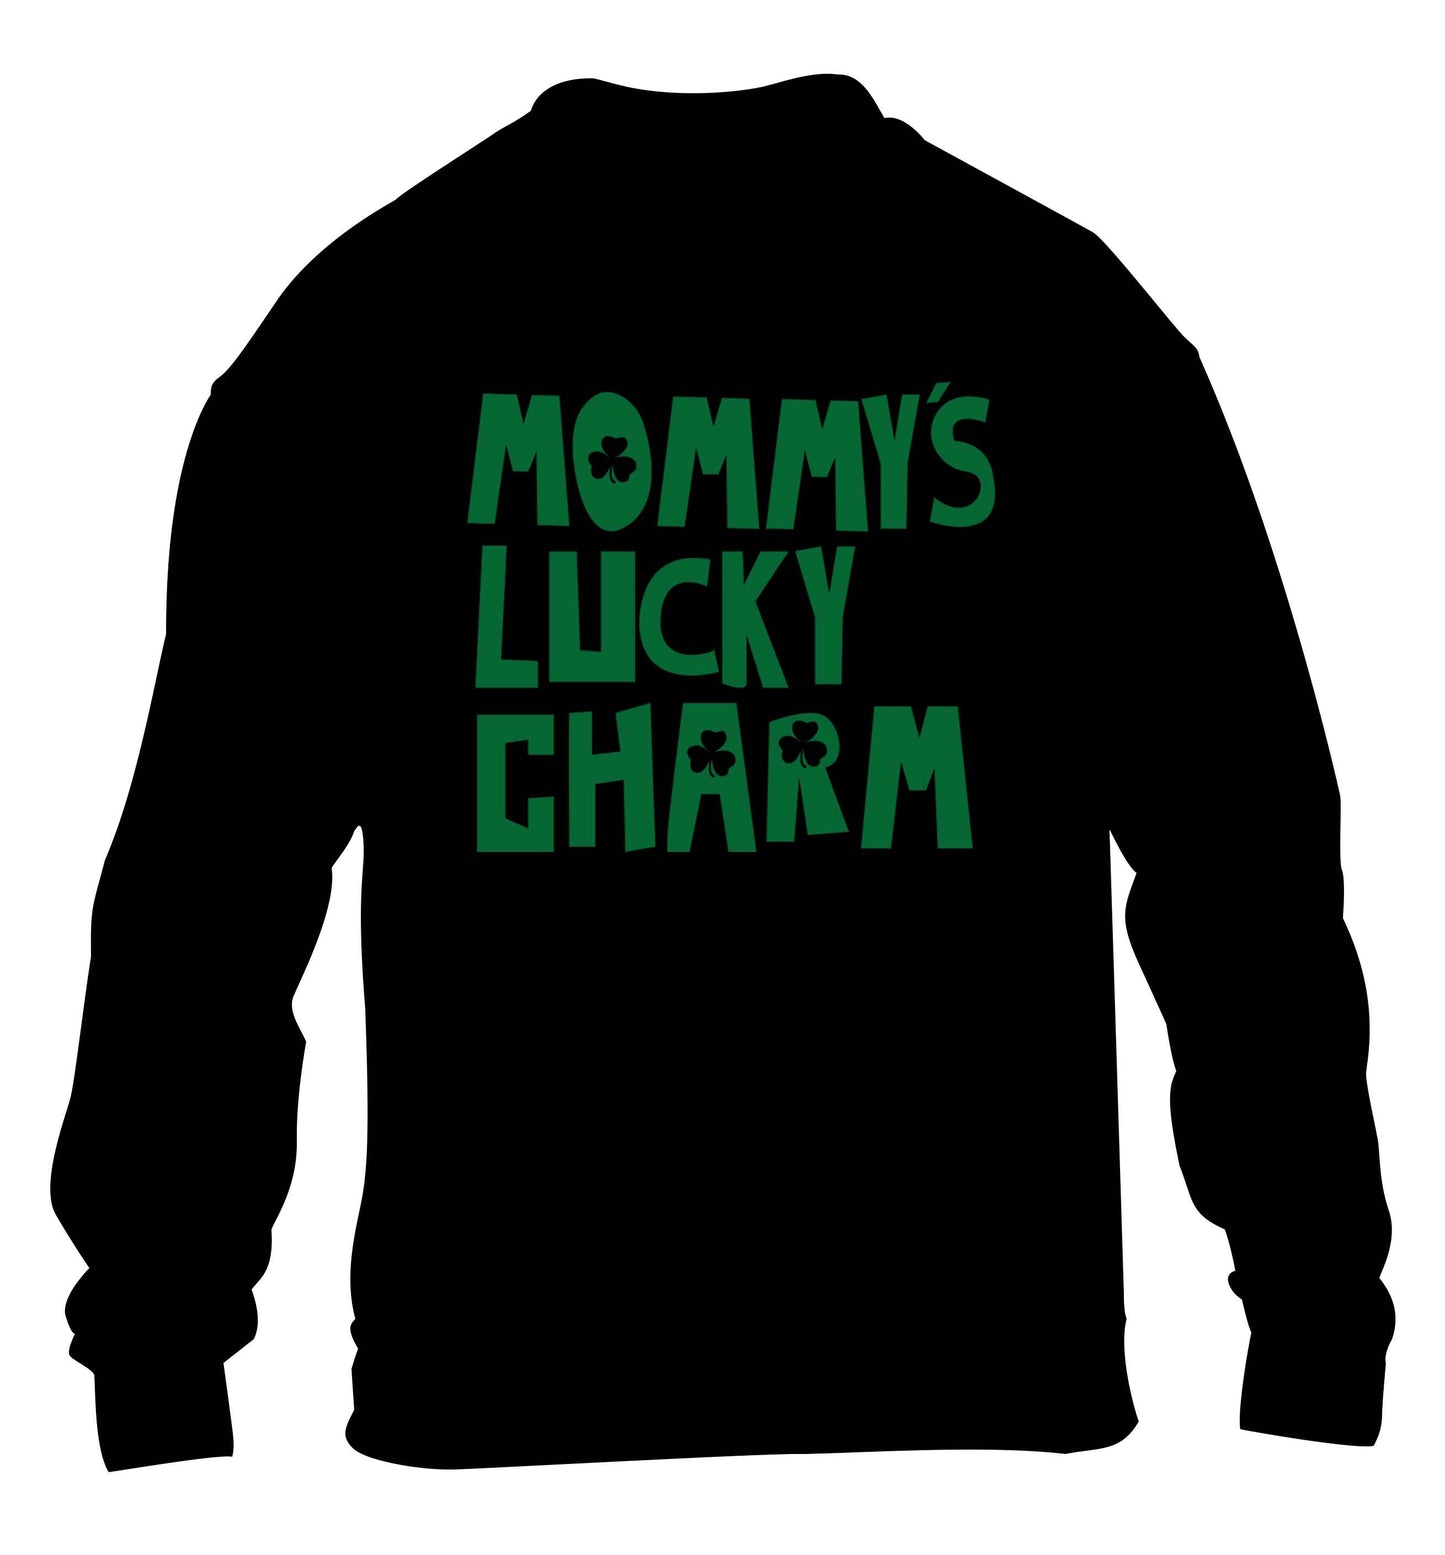 Mommy's lucky charm children's black sweater 12-13 Years